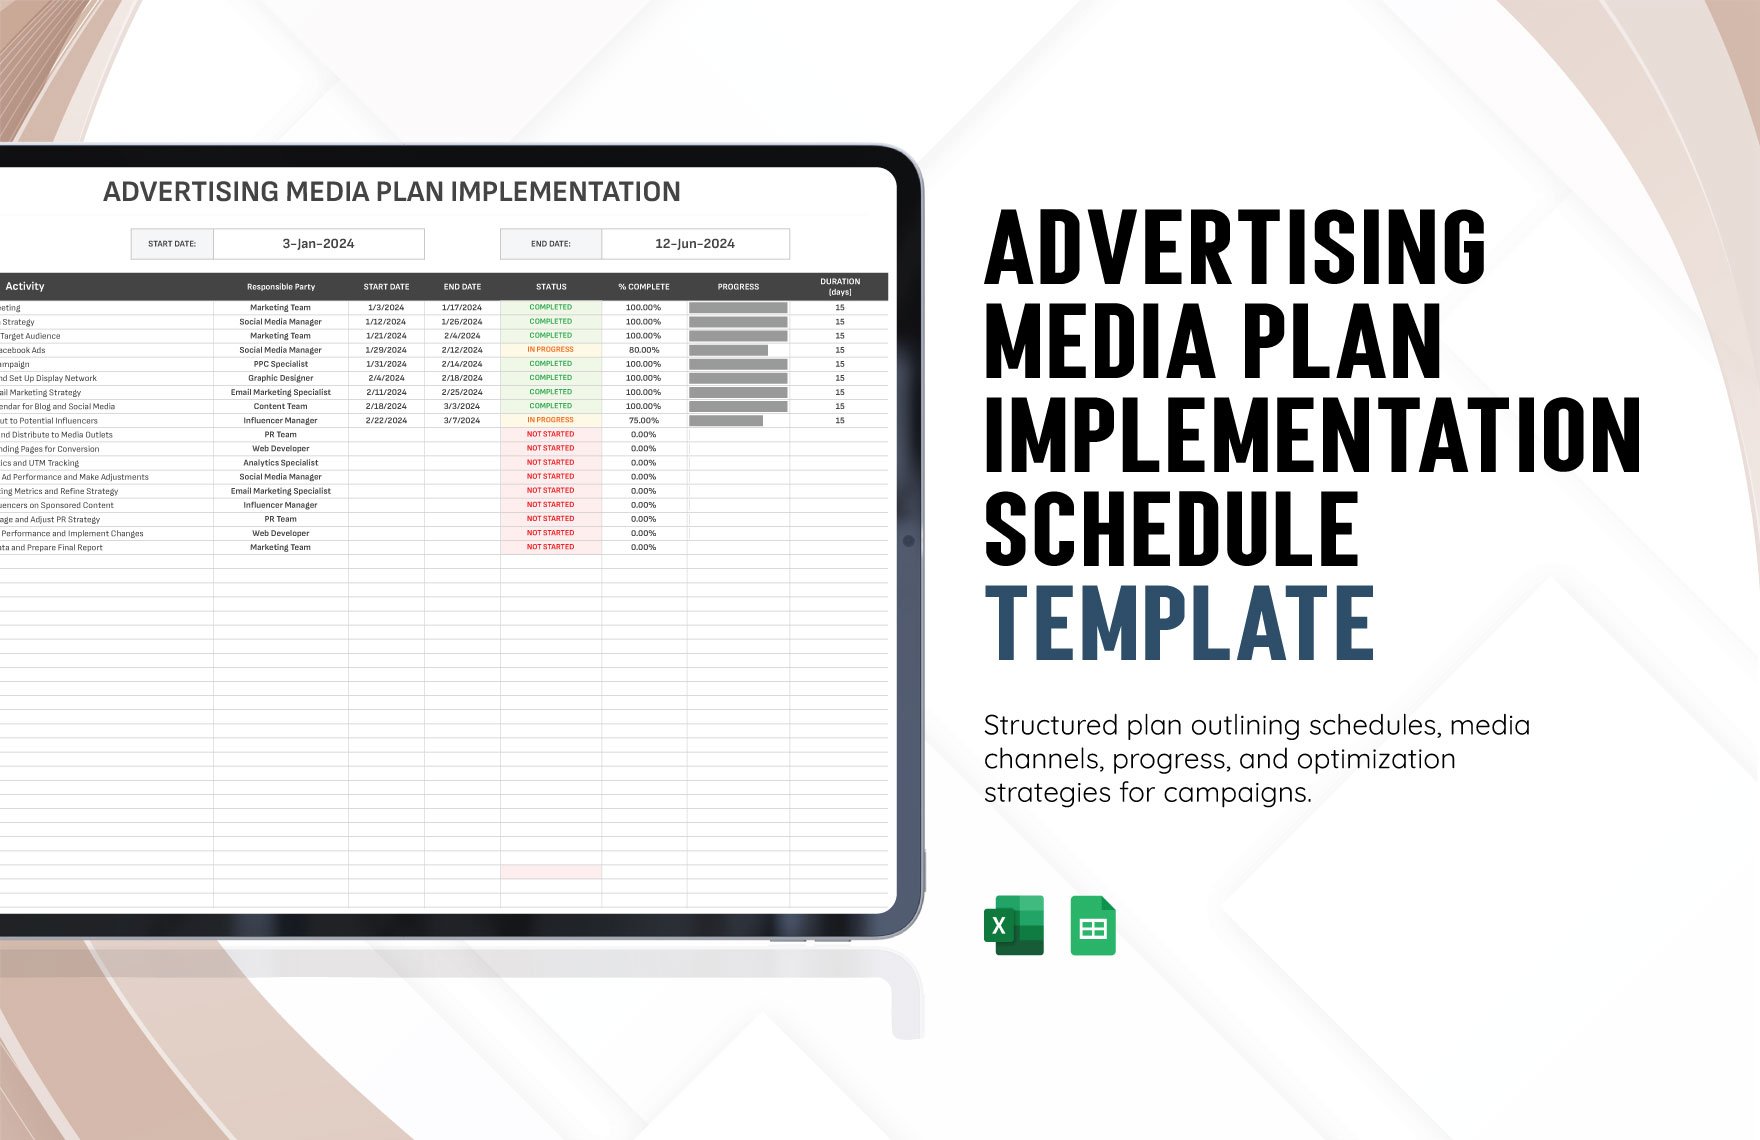 Advertising Media Plan Implementation Schedule Template in Excel, Google Sheets